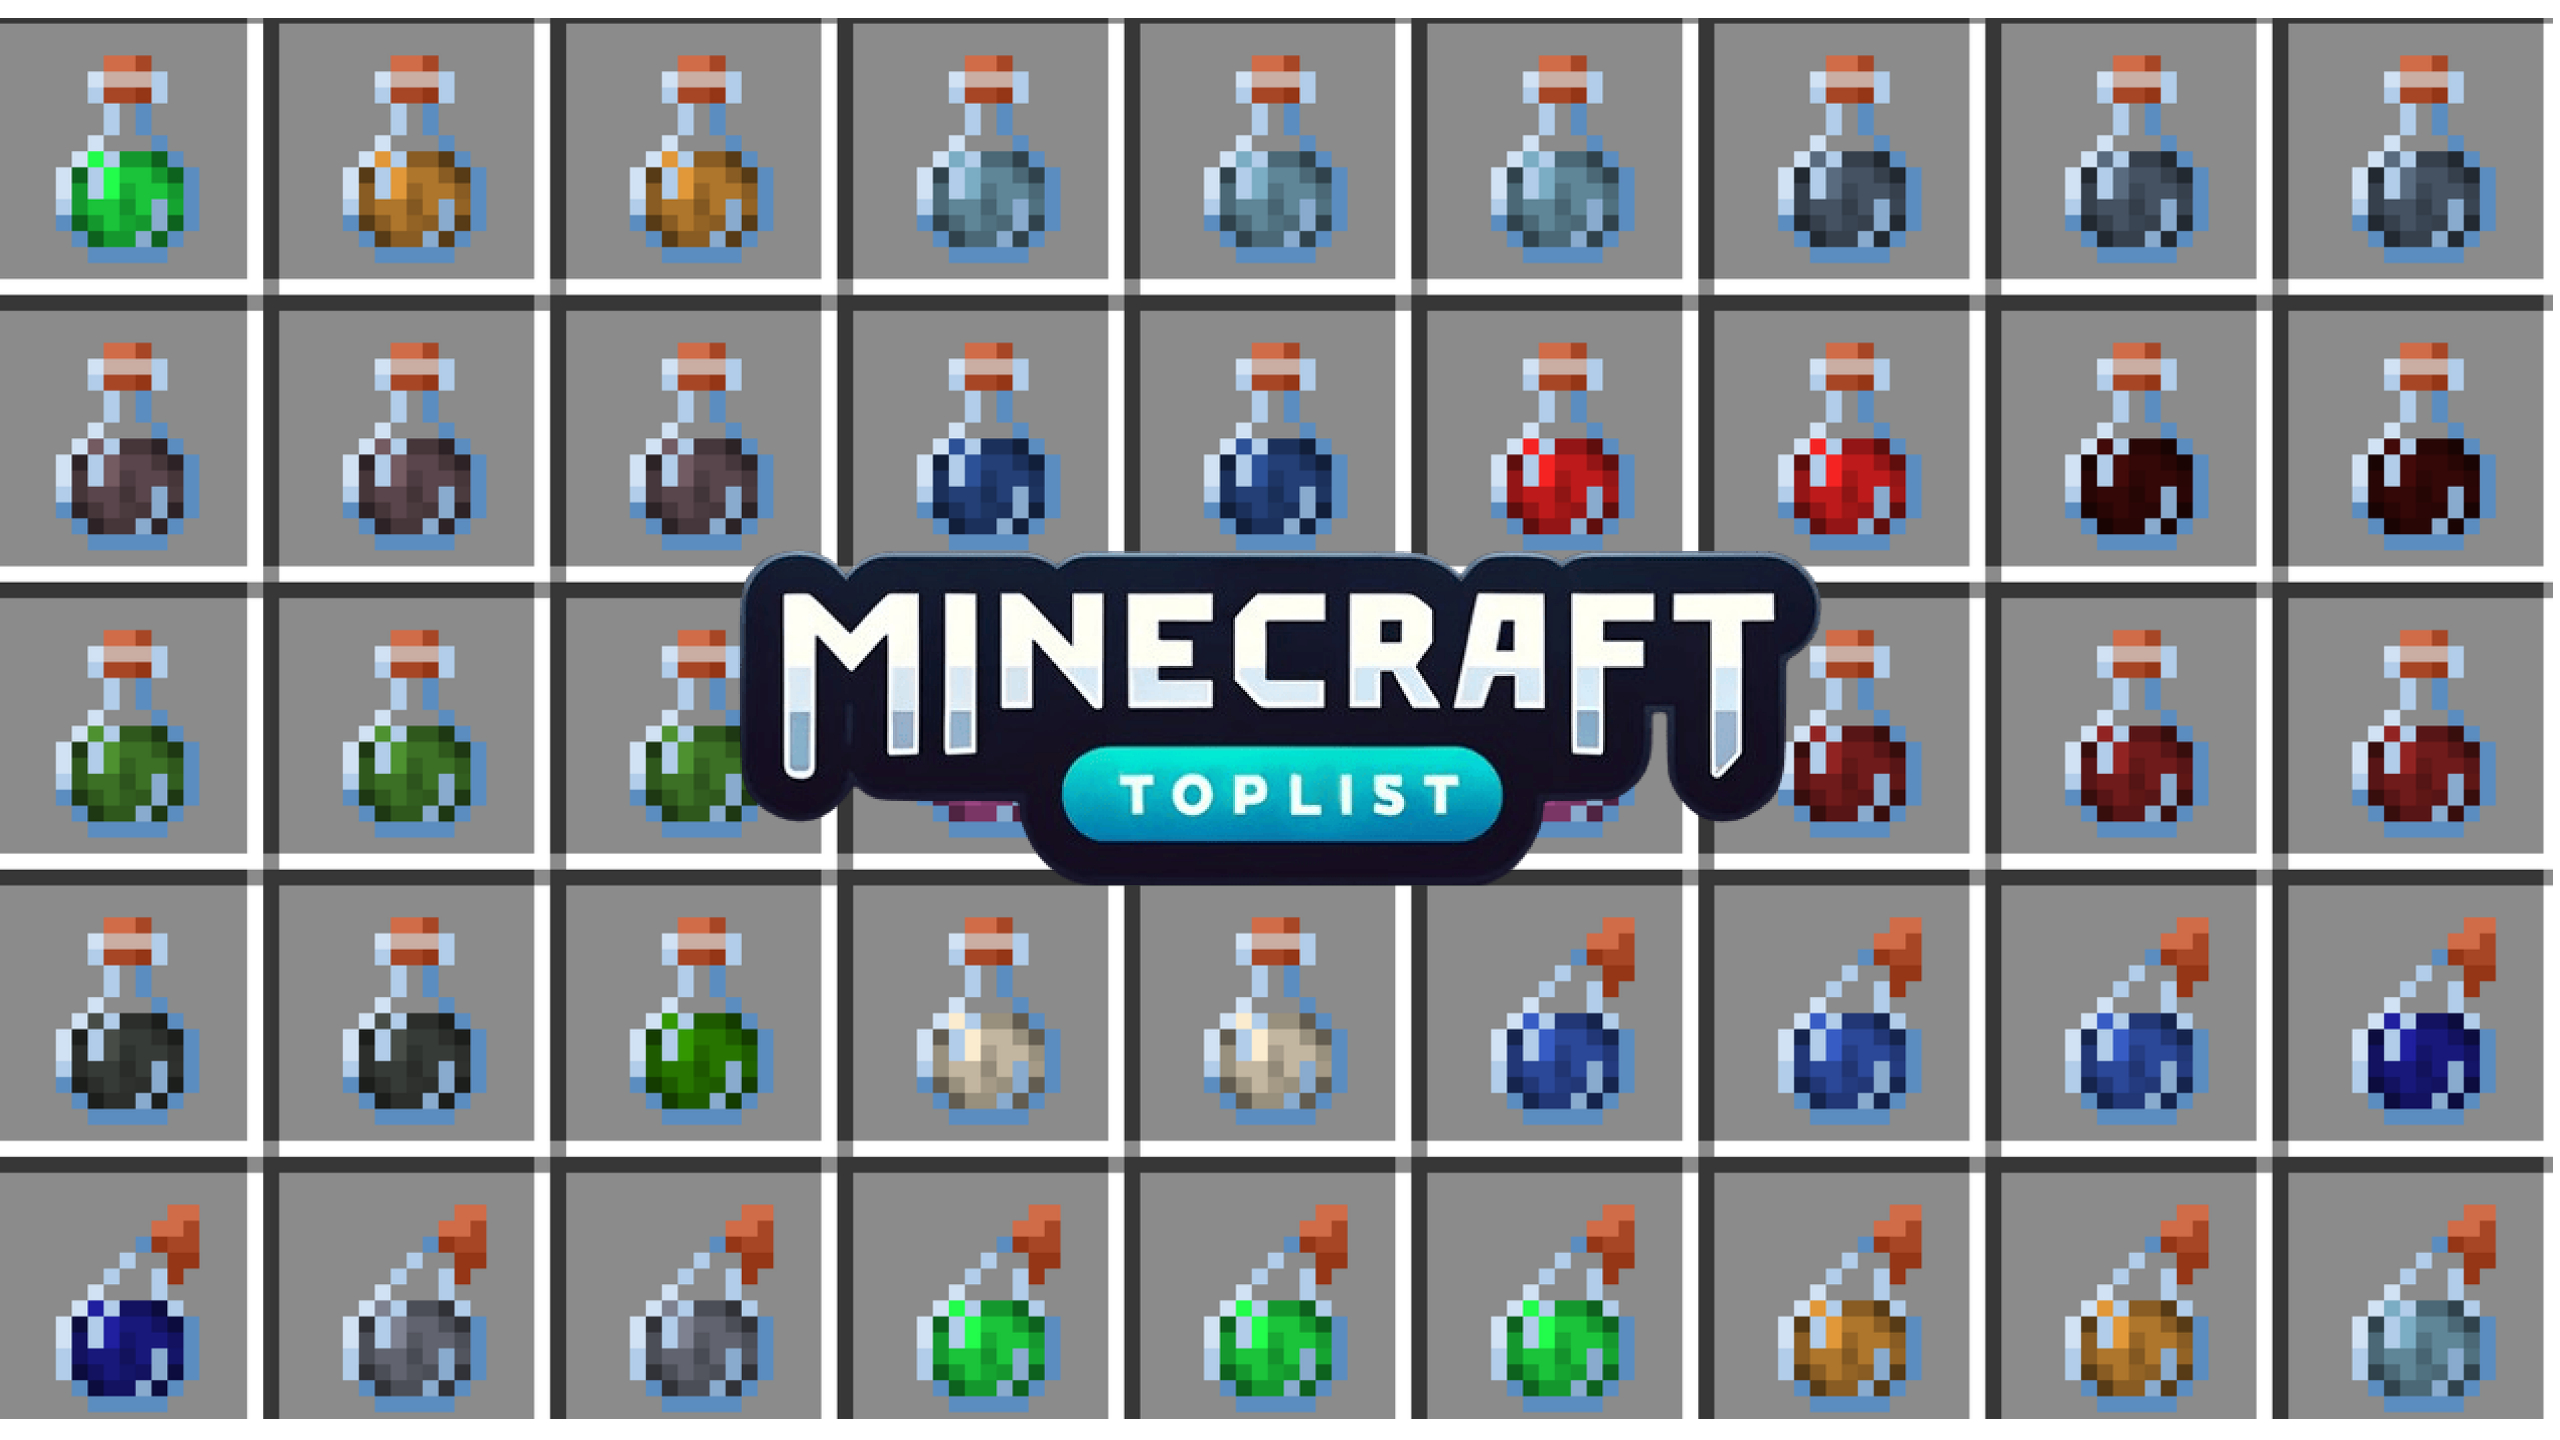 How to Make Potions in Minecraft